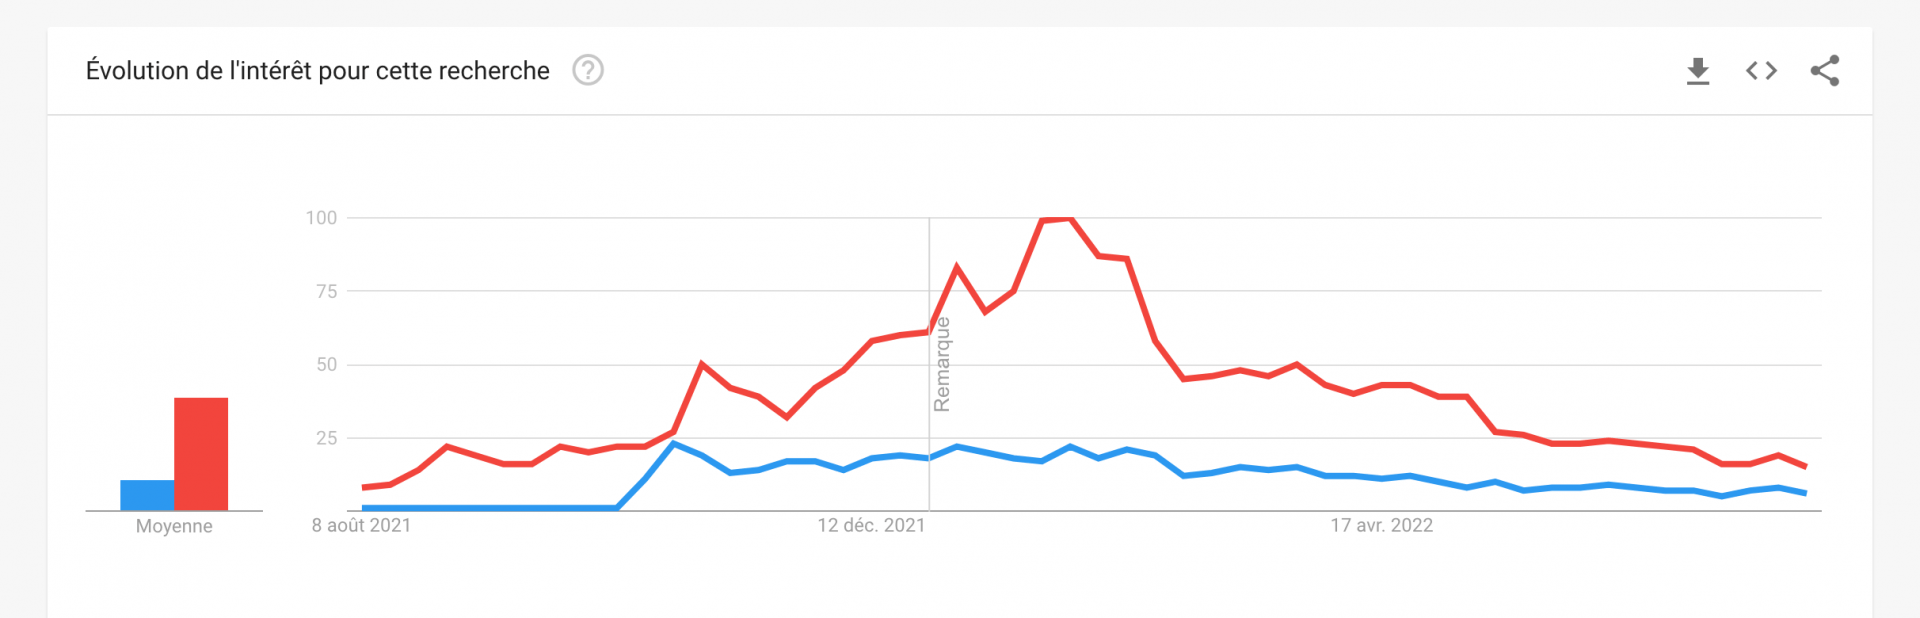 Interest comparison of NFT and Metaverse terms.  Source: Google Trends